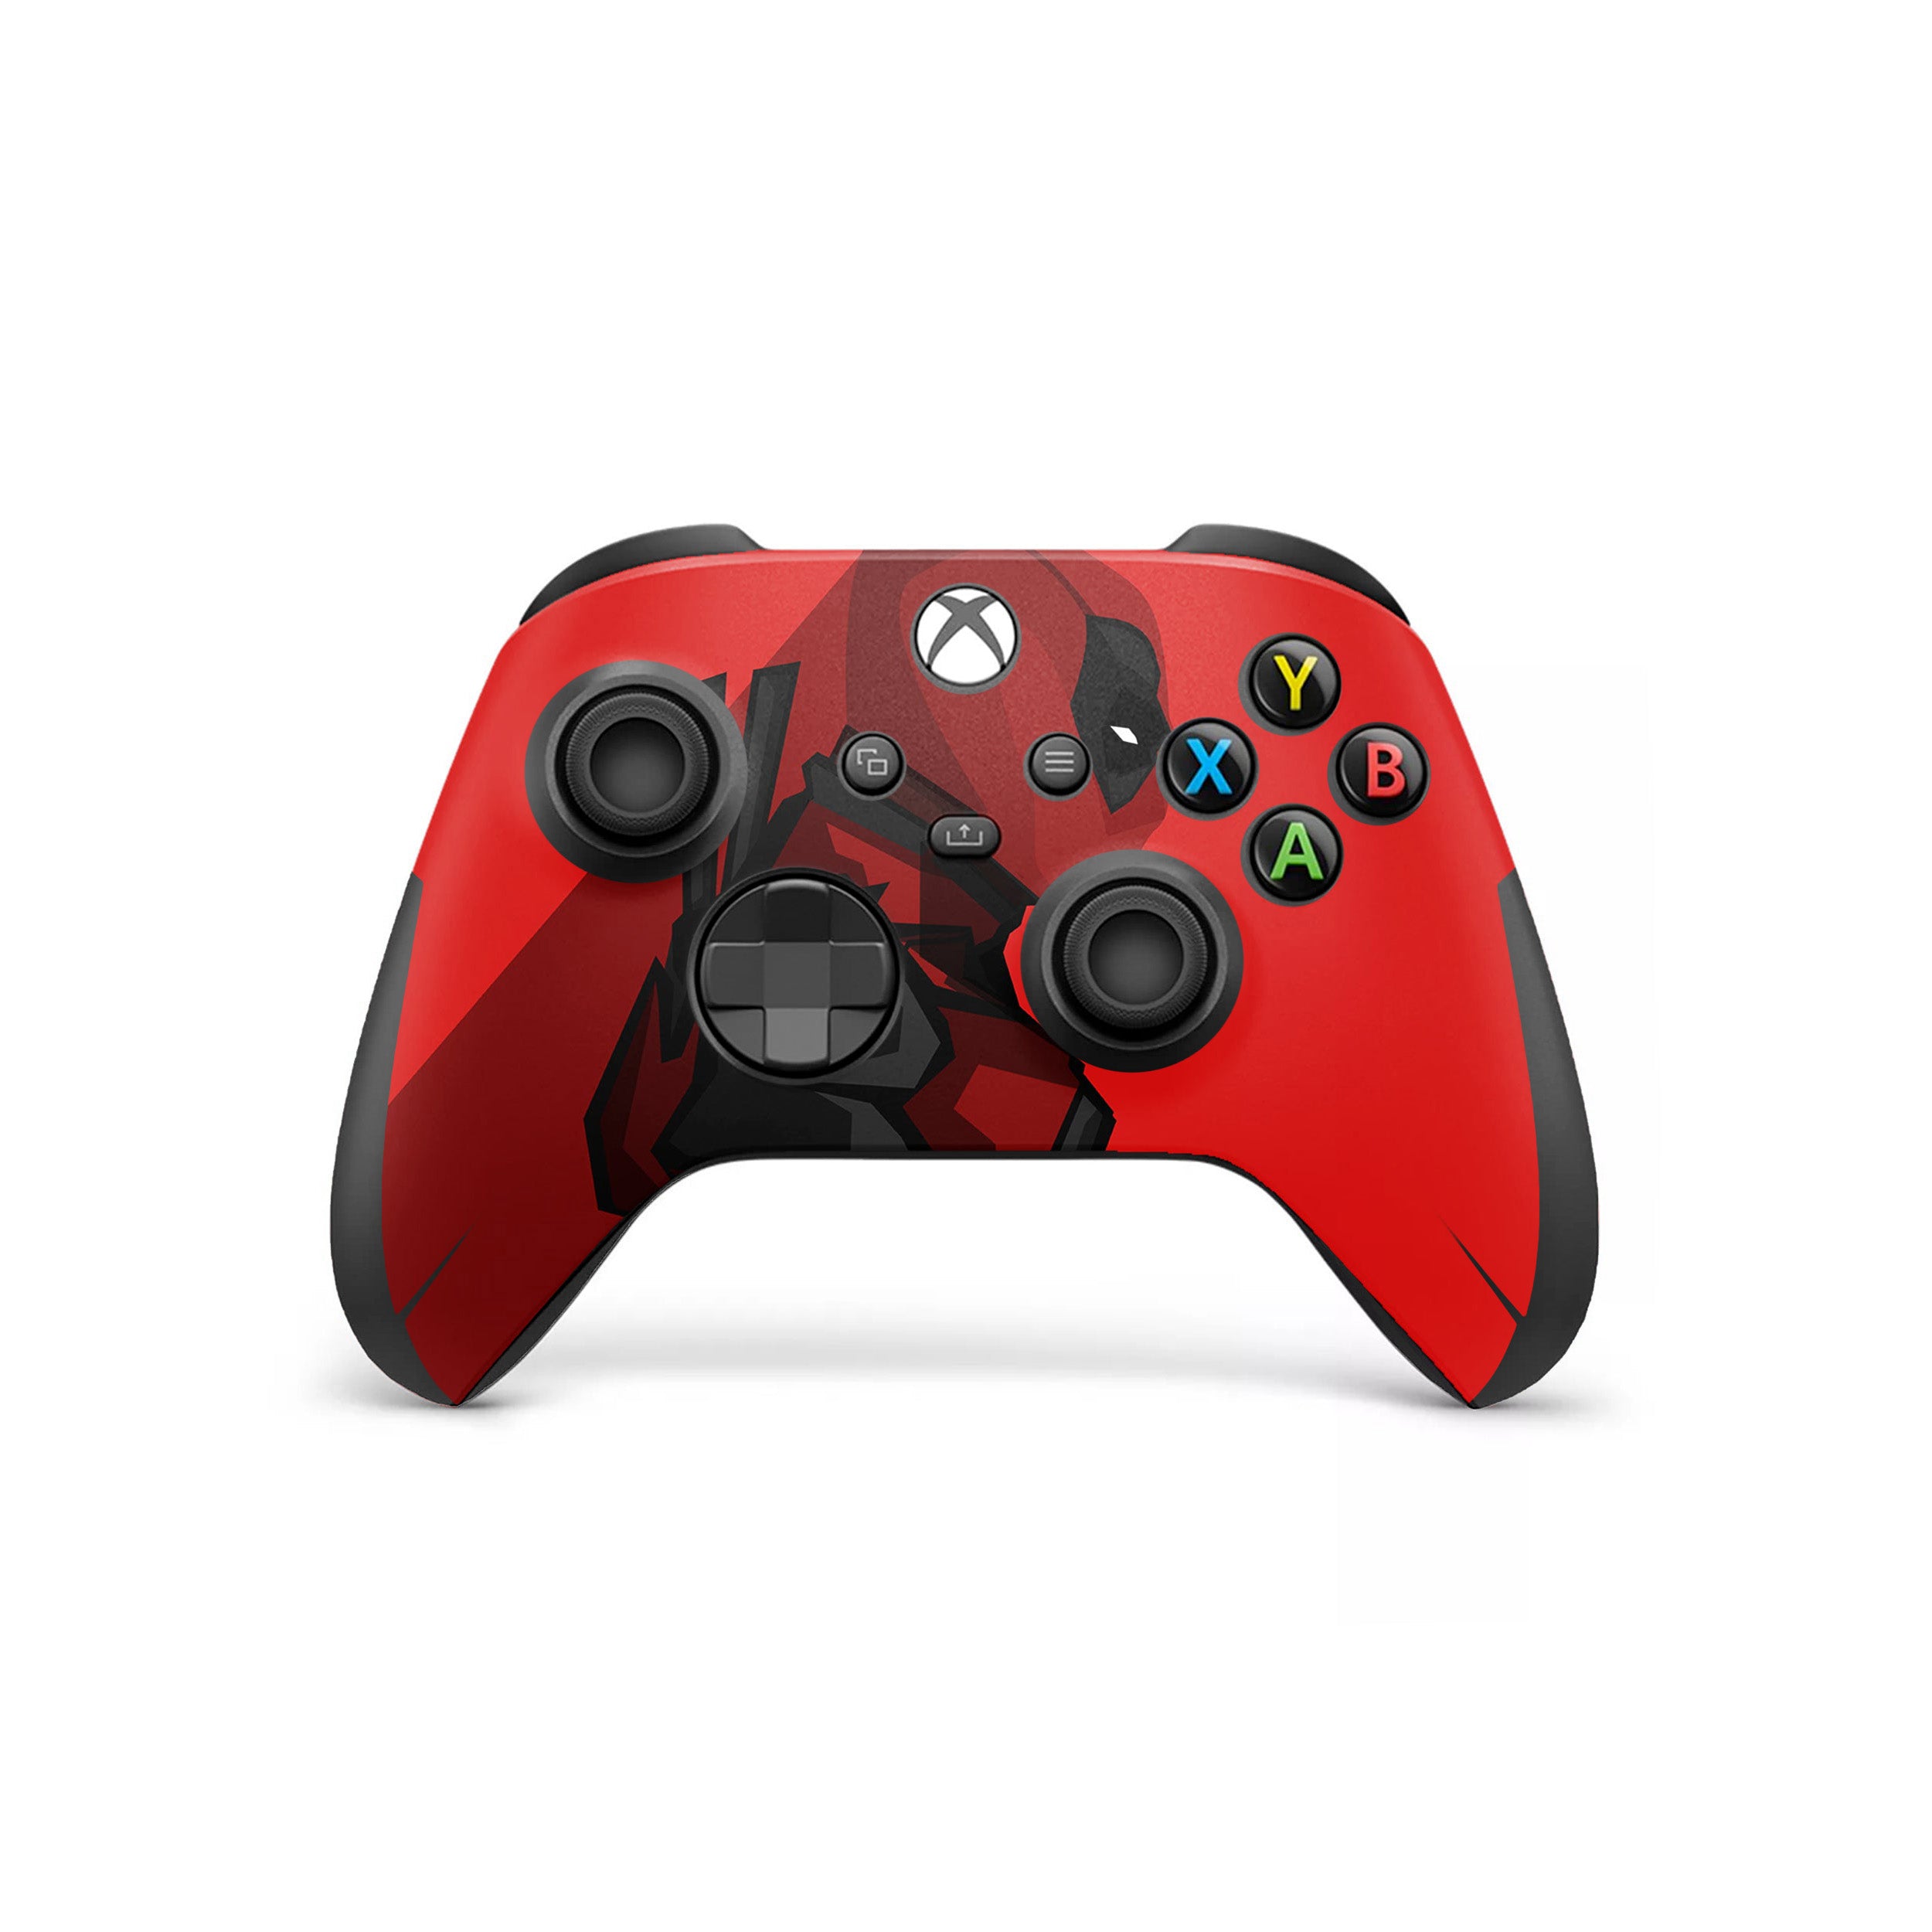 A video game skin featuring a Marvel Comics Deadpool design for the Xbox Wireless Controller.